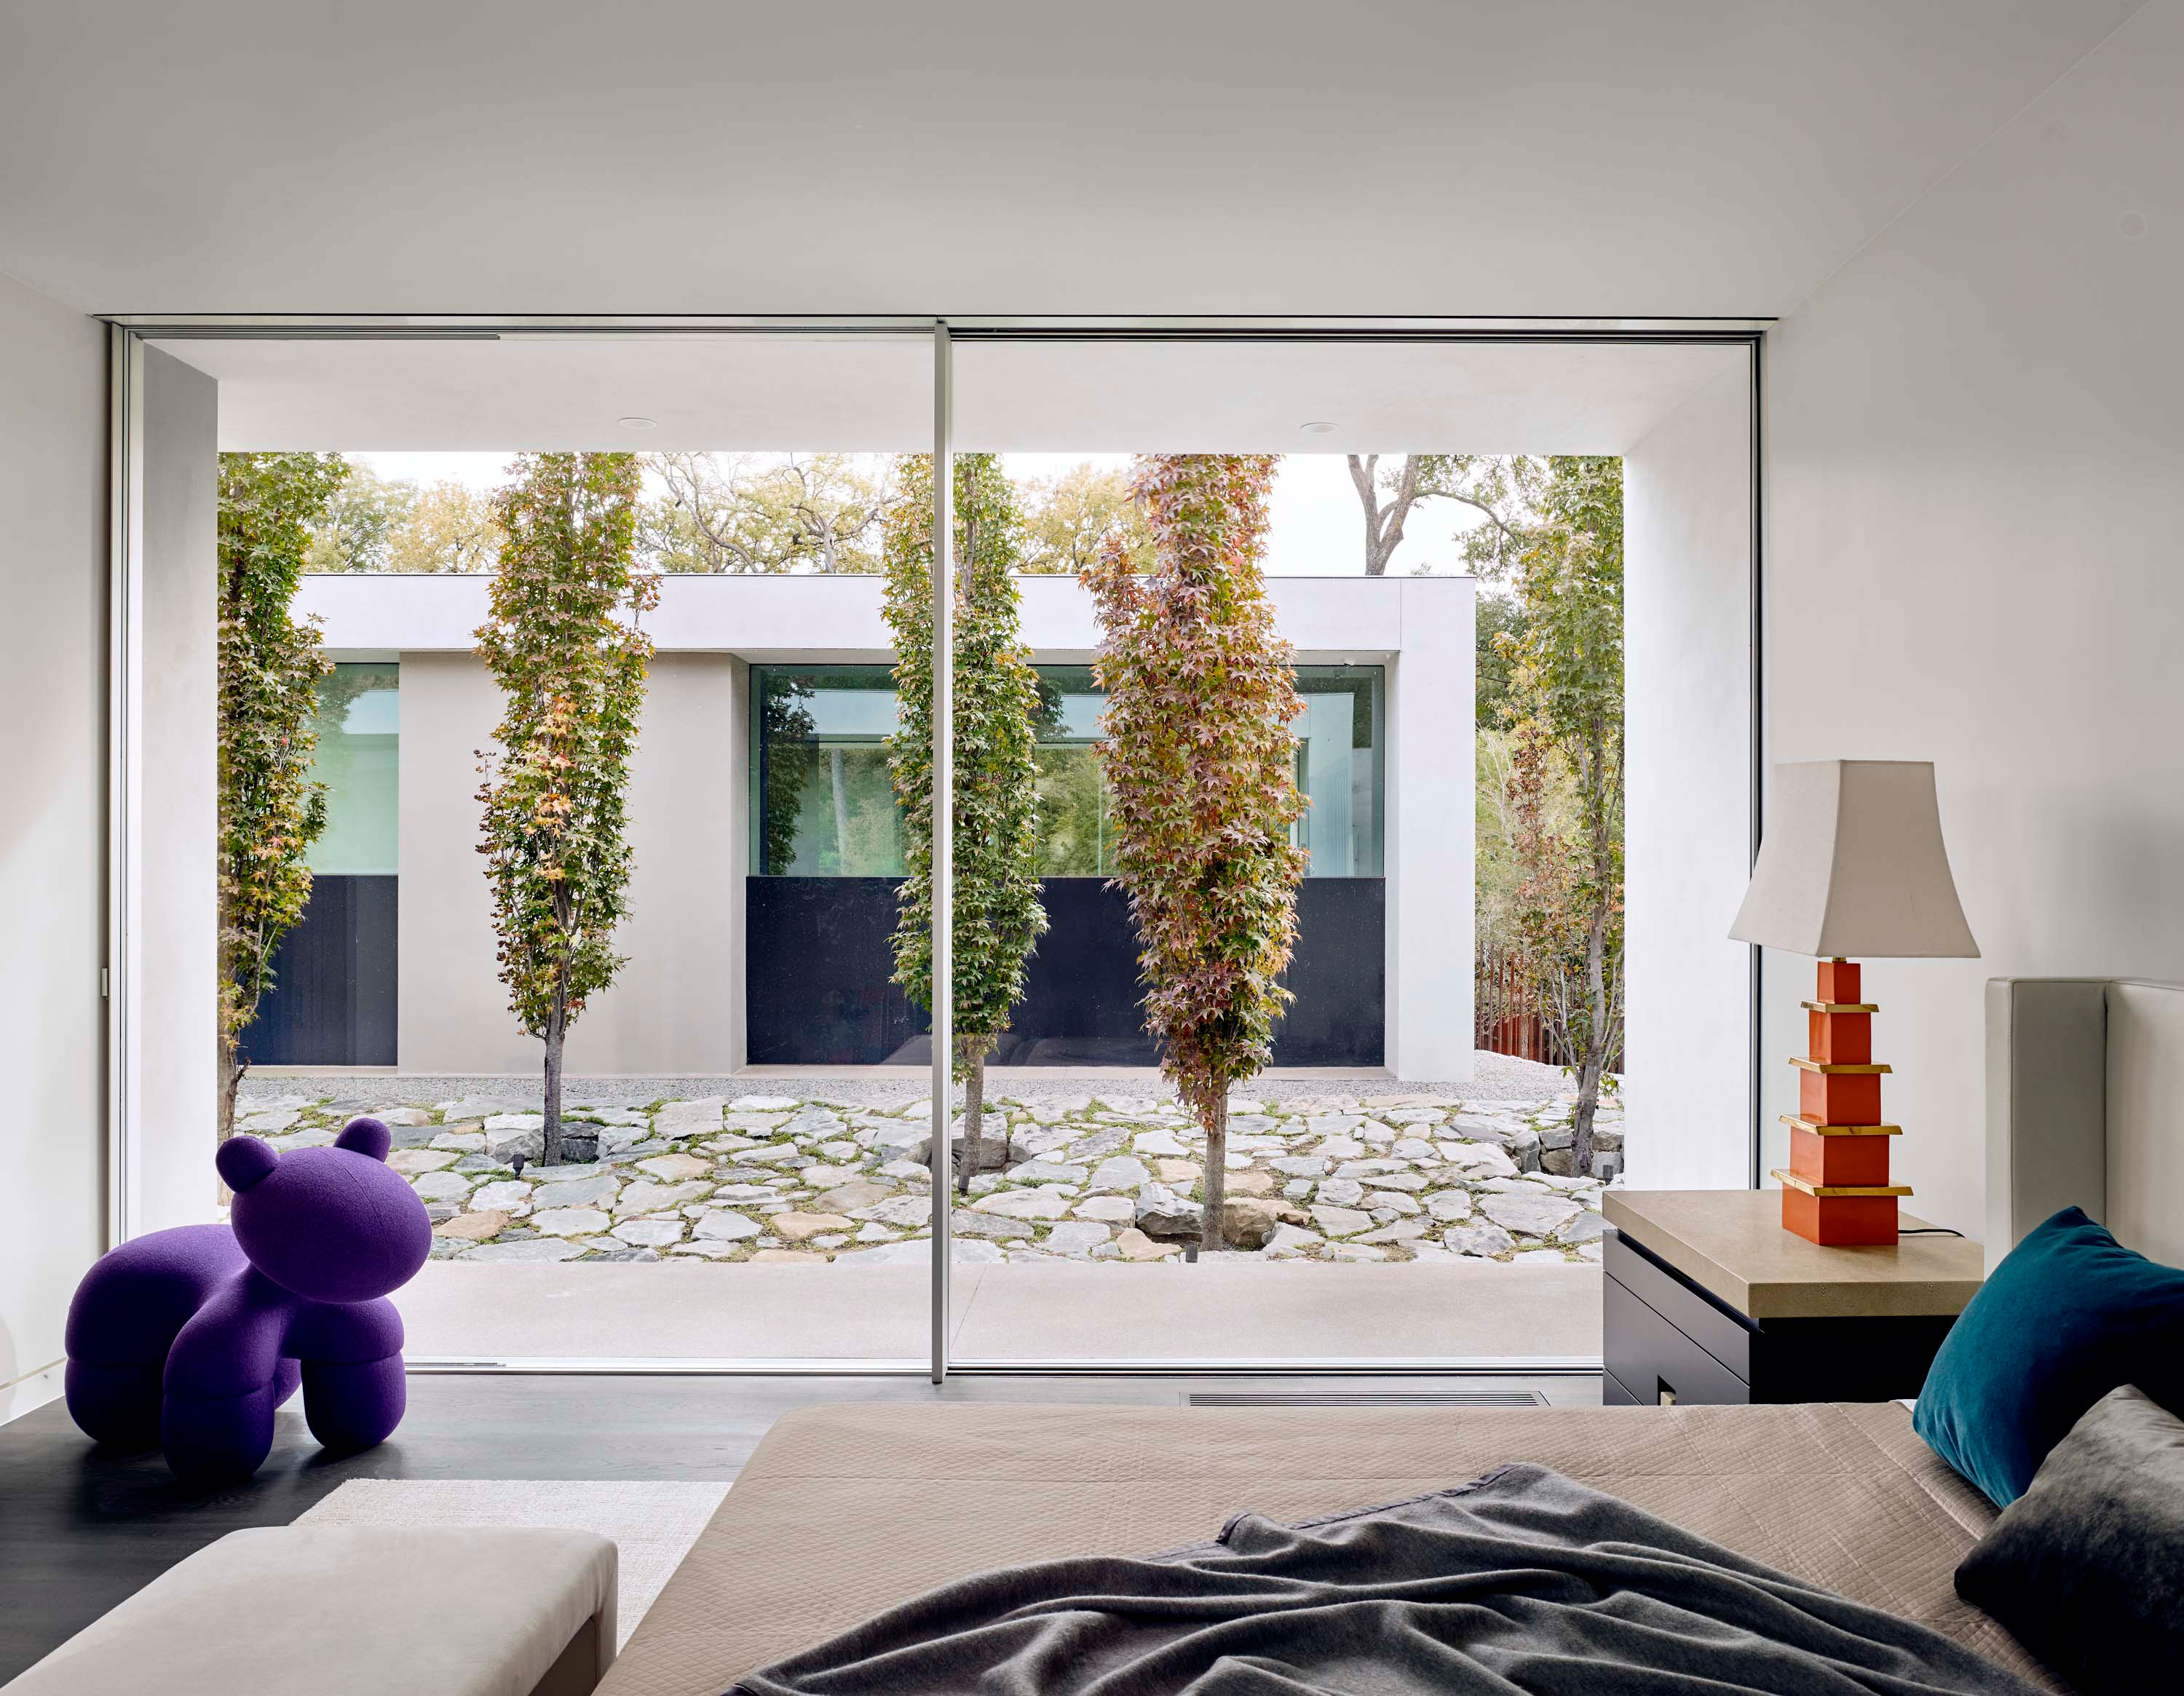 Interior photo of the Preston Hollow Residence by Specht Novak Architects. Shot by Manolo Langis, featuring a floor to ceiling glass wall with views of tree garden.